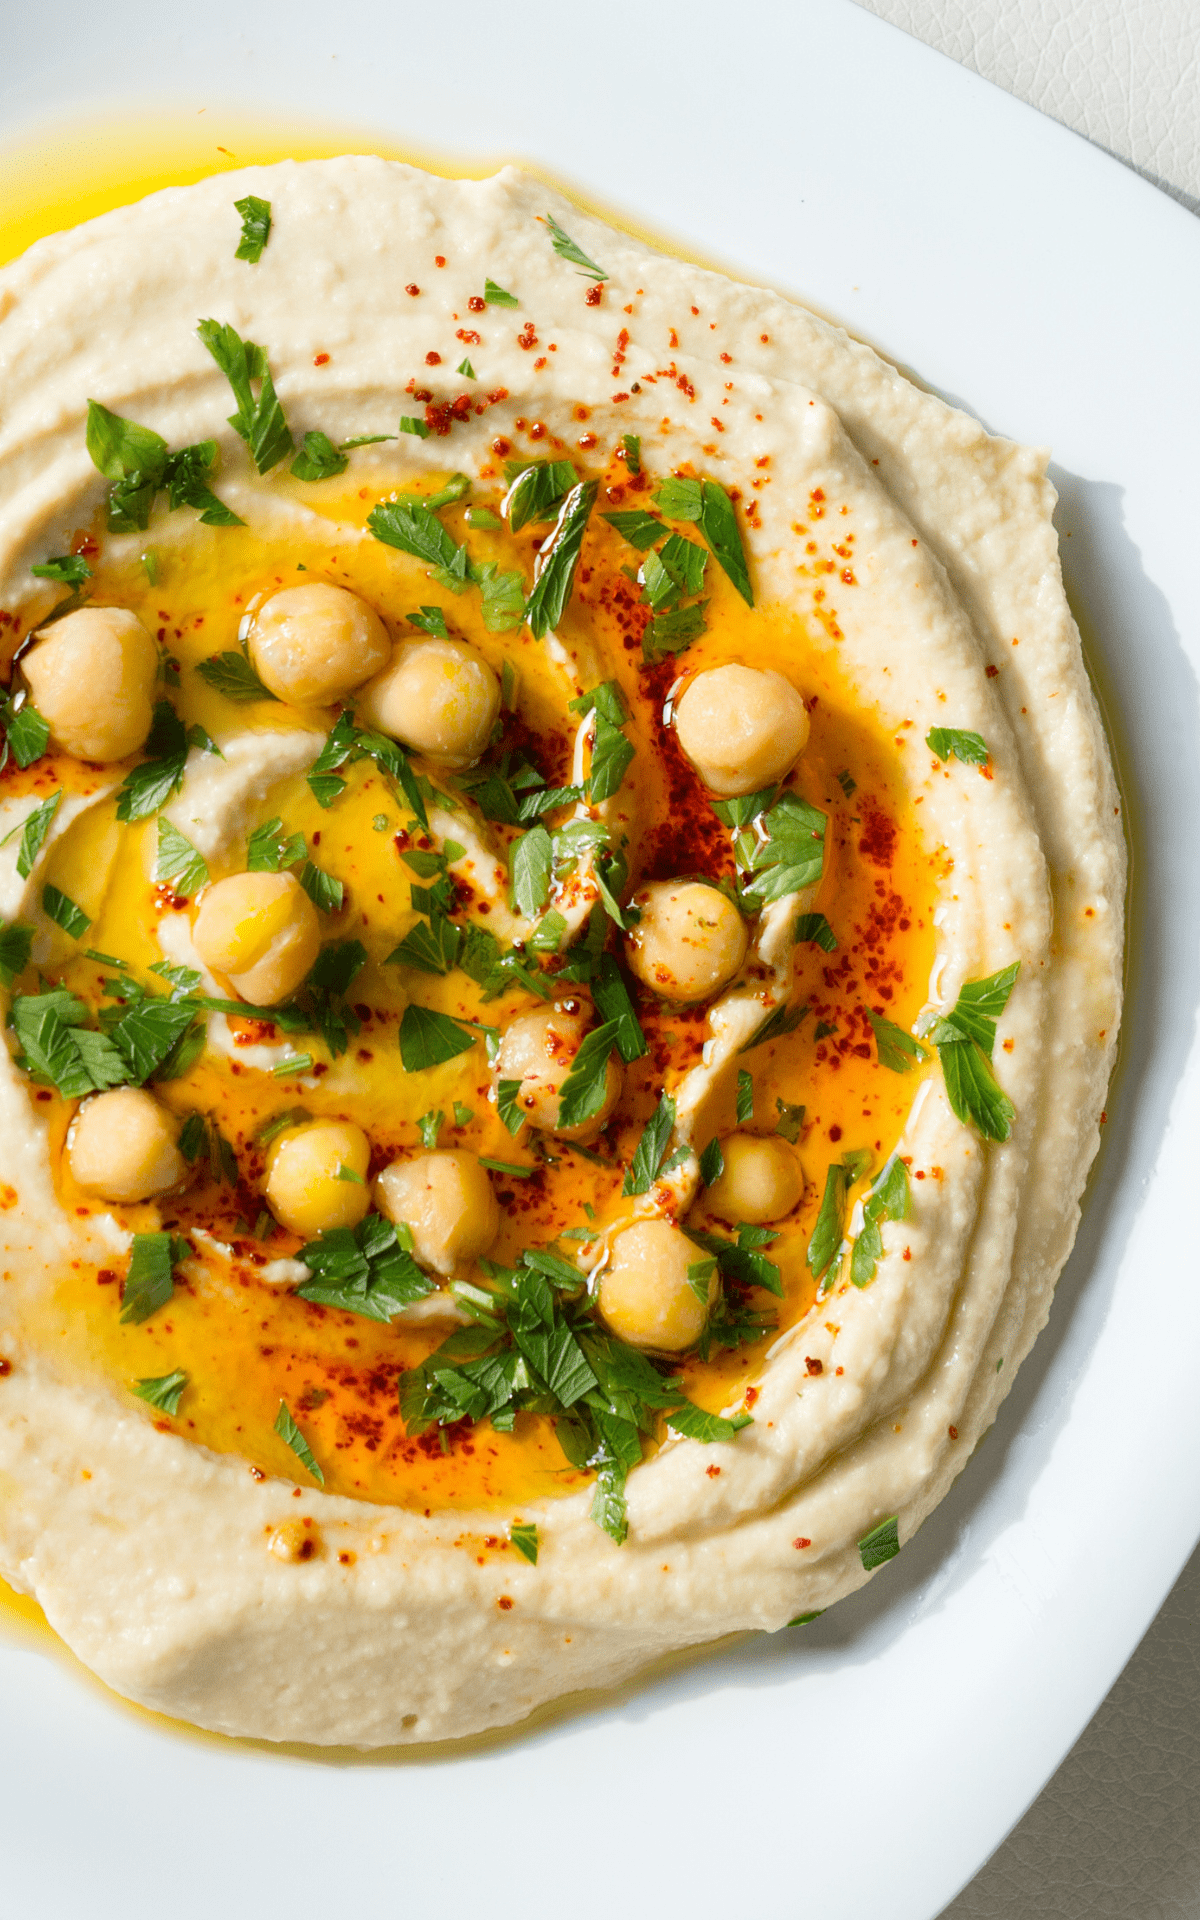 A platter with authentic hummus.